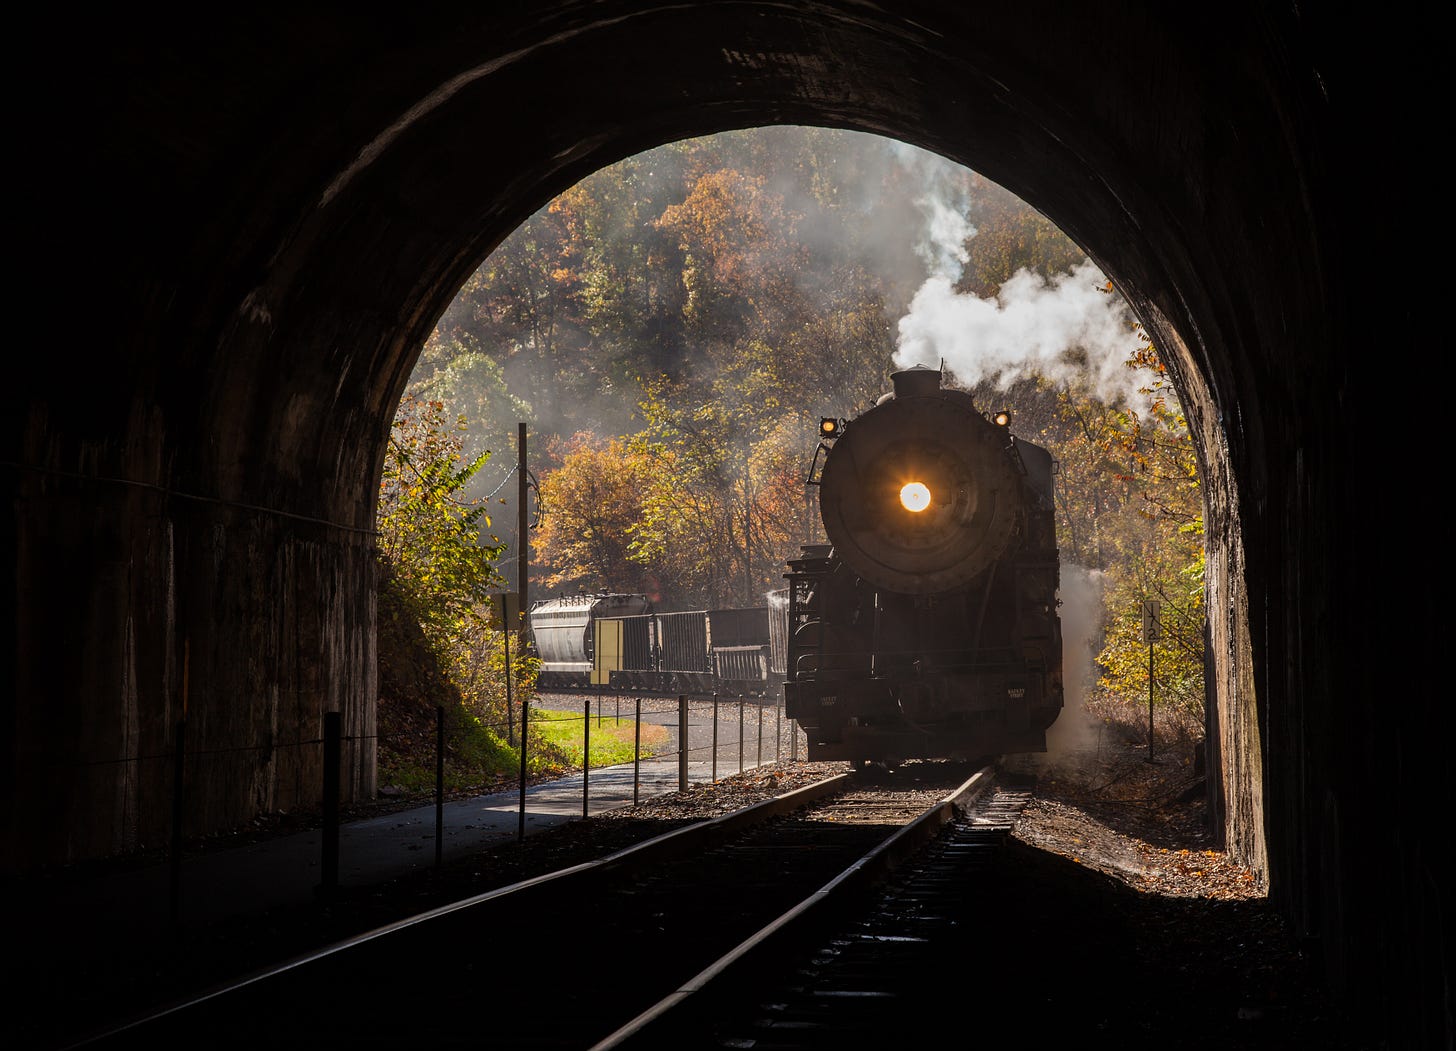 Old train entering a tunnel with a single headlight on and smoke billowing from the engine